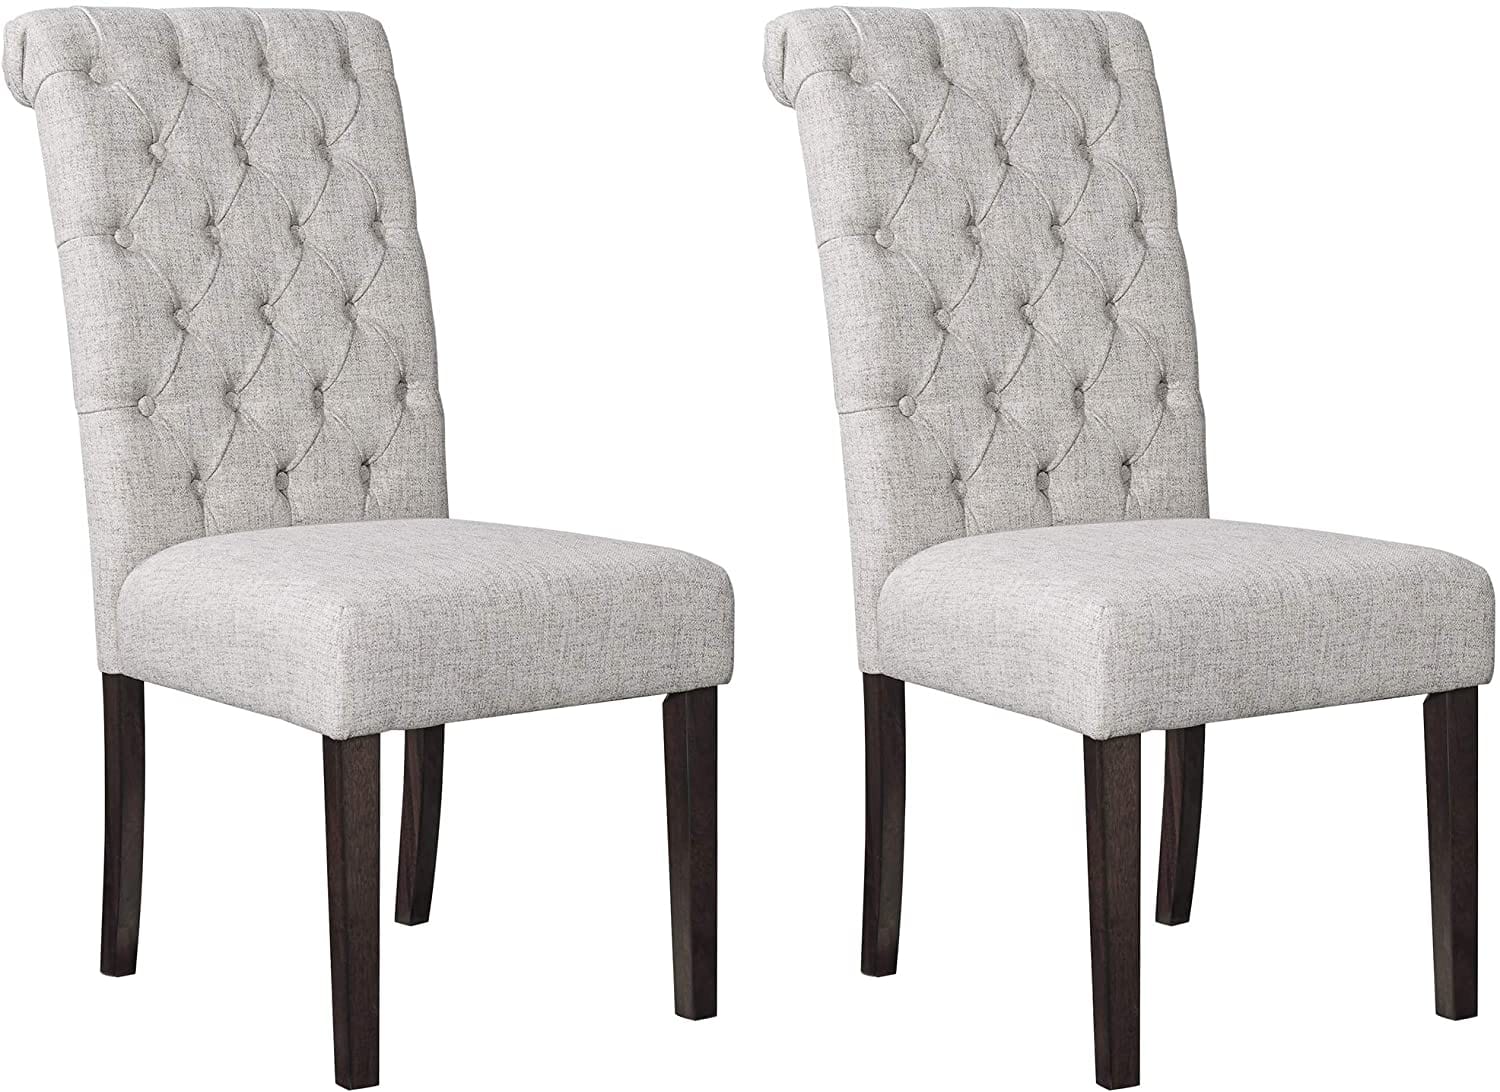 Classic Upholstered Dining Chair, Set of 2, Light Gray